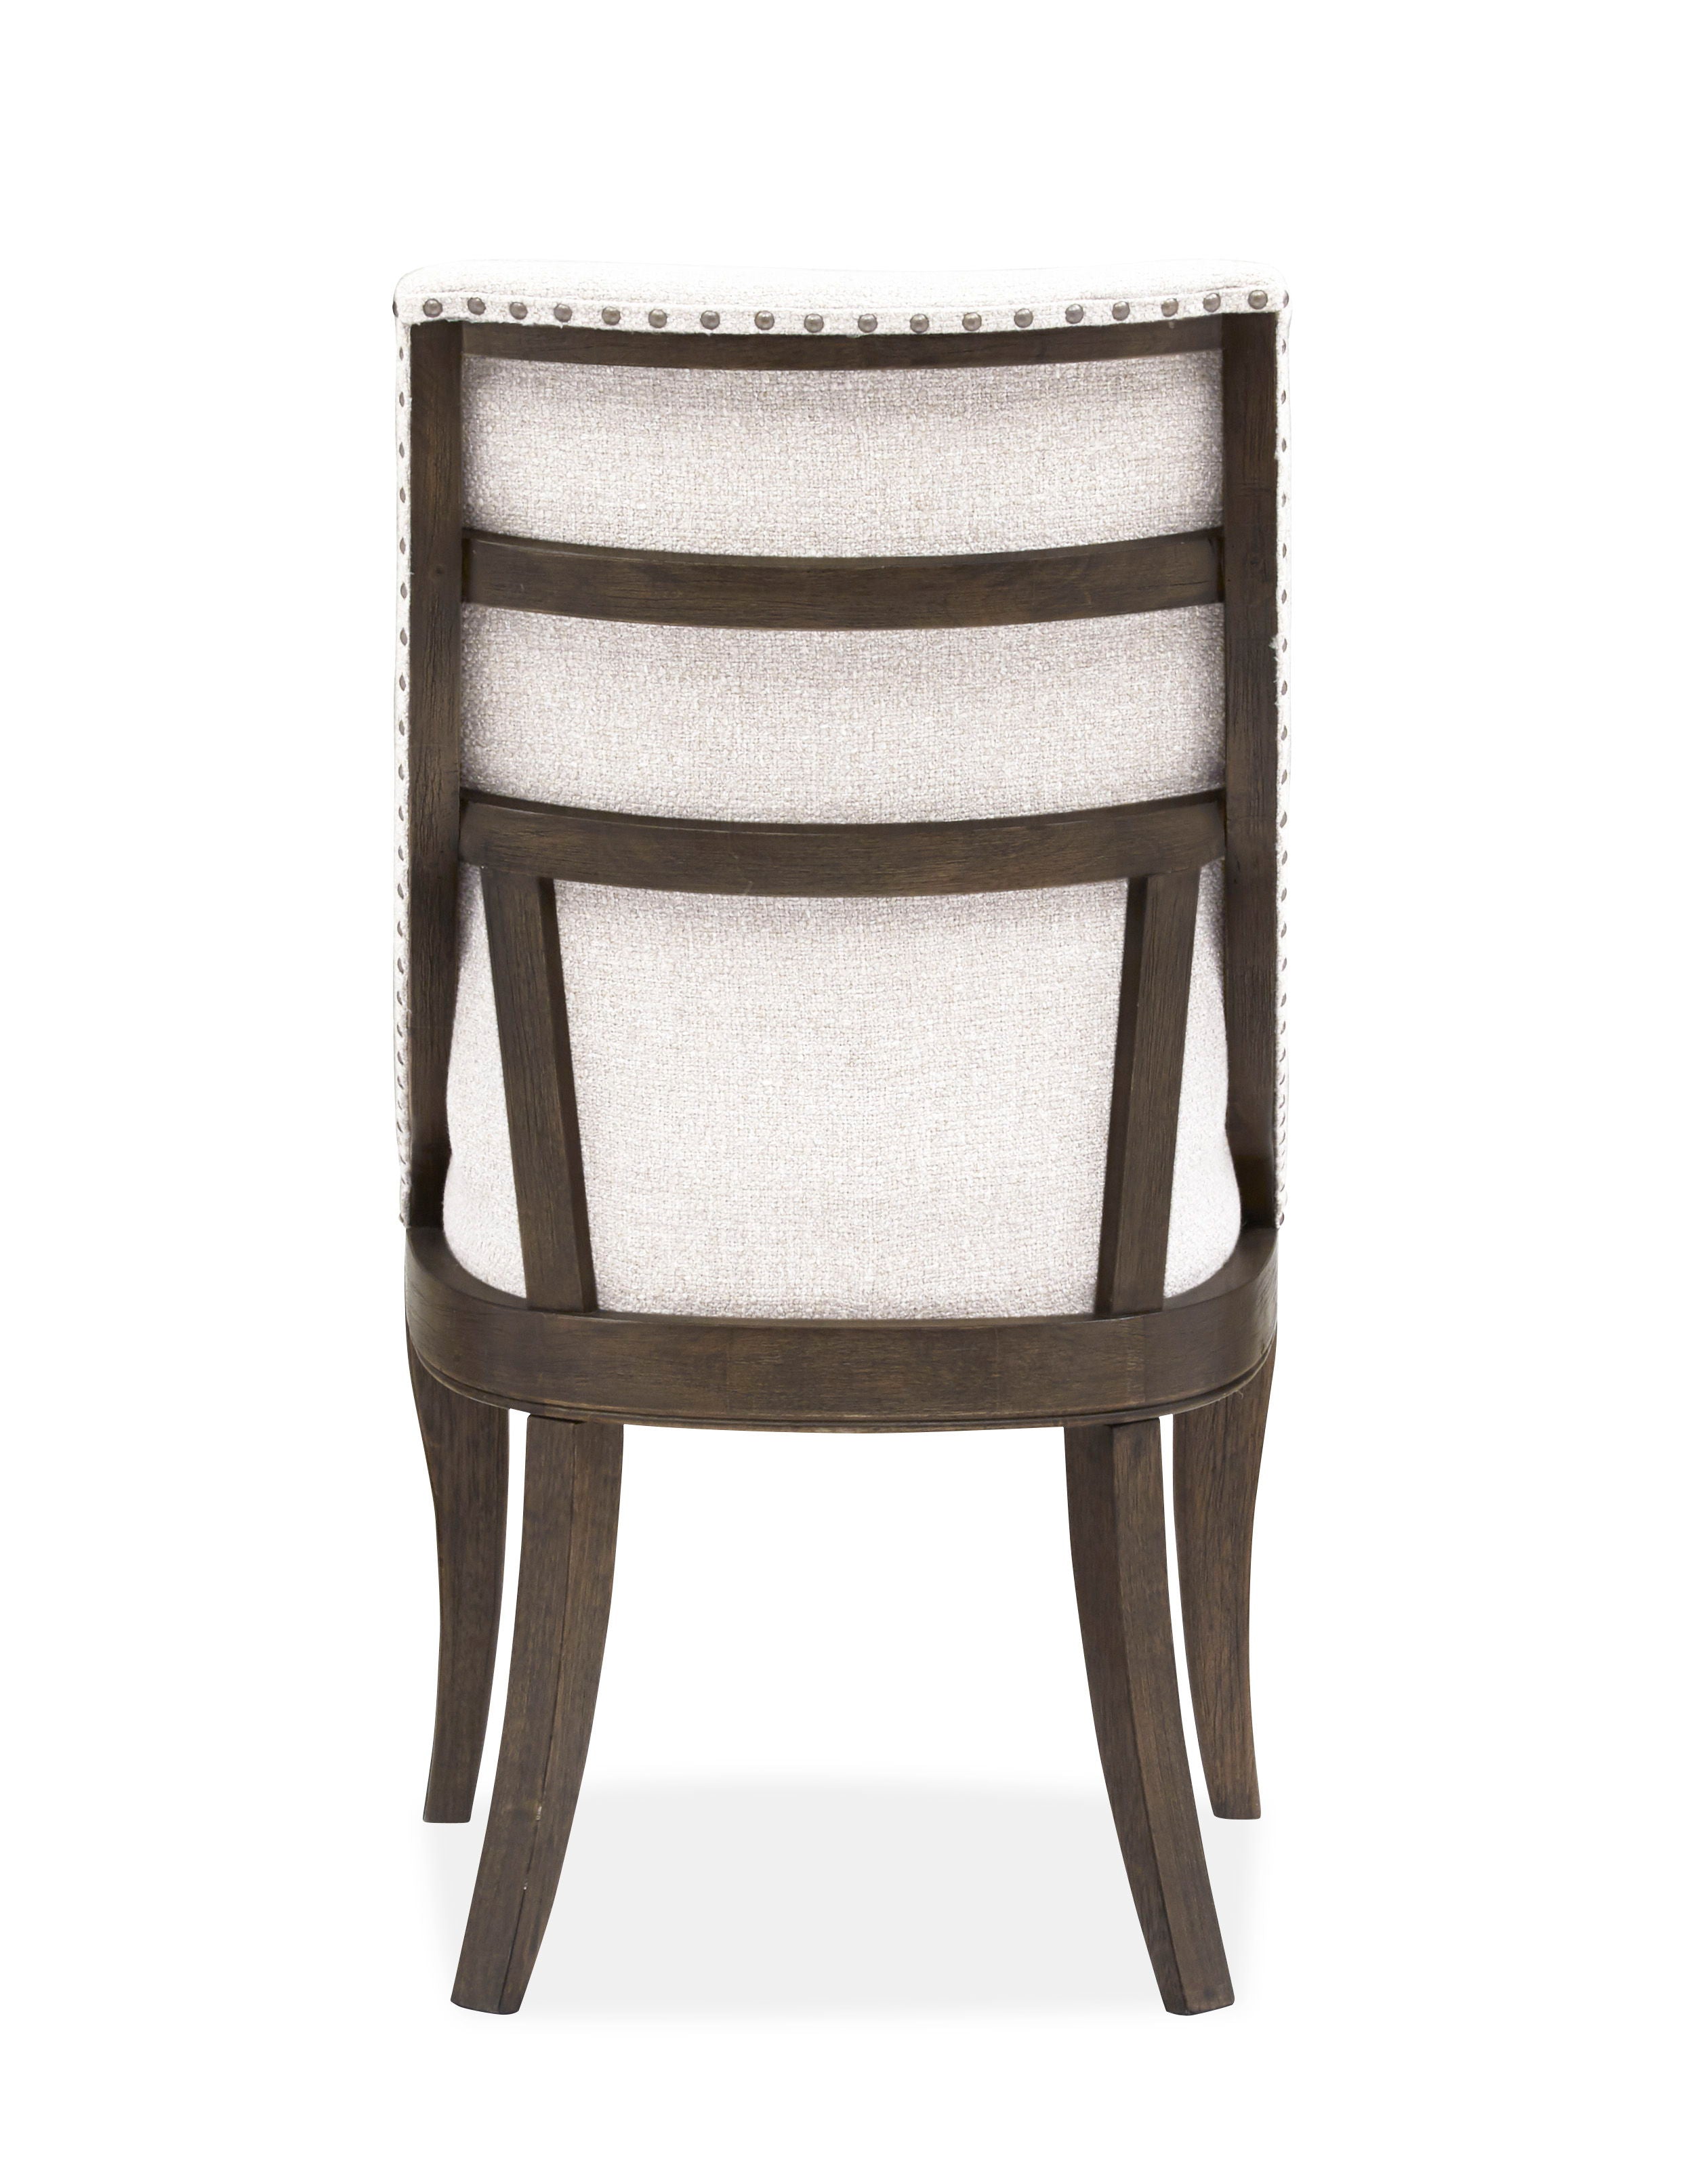 Roxbury Manor - Dining Arm Chair With Upholstered Seat and Back (Set of 2) - Homestead Brown